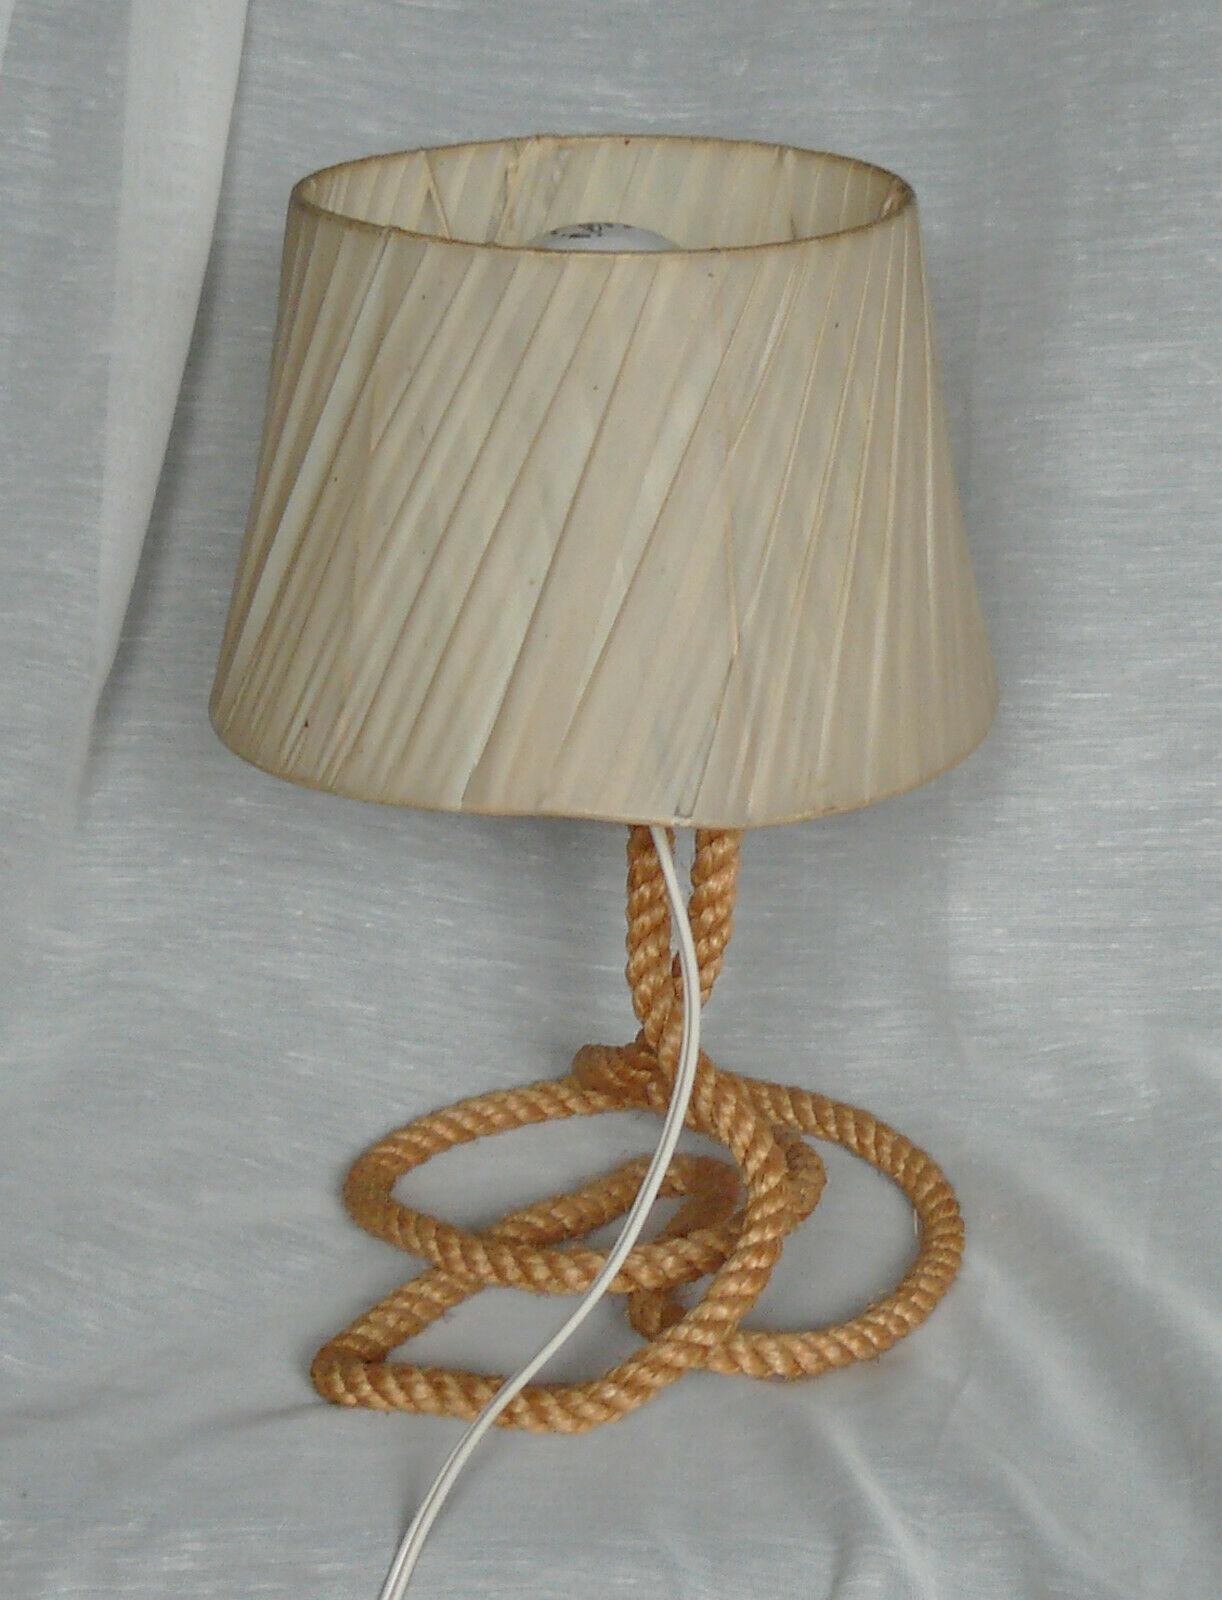 Audoux Minet rope table lamp, 1950 by Adrien Audoux and Frida Minet.